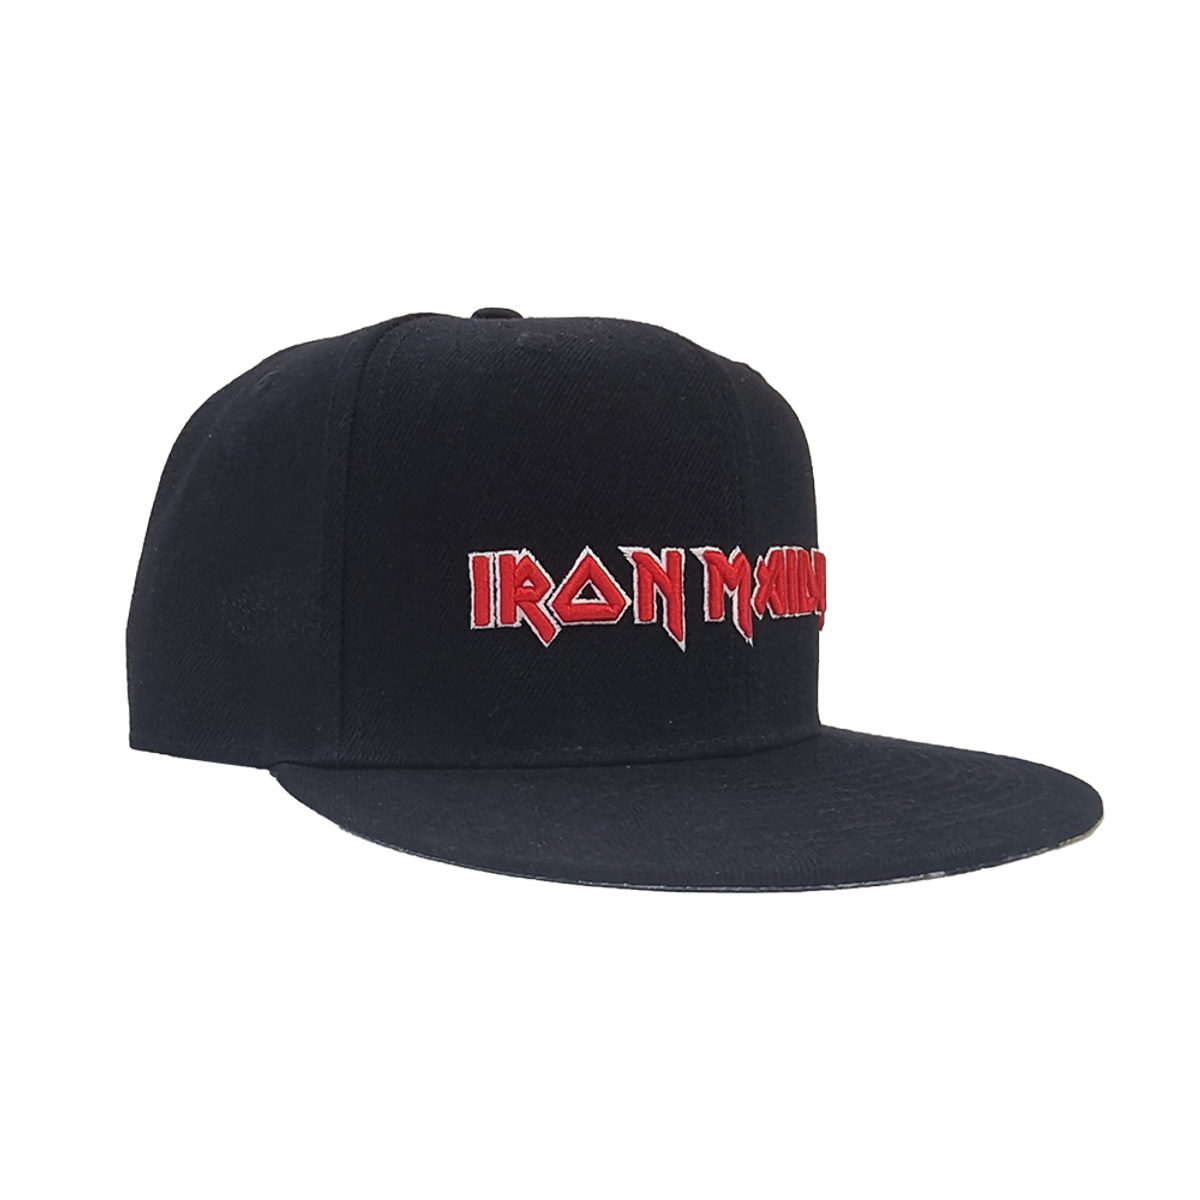 Legacy of the Beast Warriors Cap 2022 Tour - Iron Maiden Store